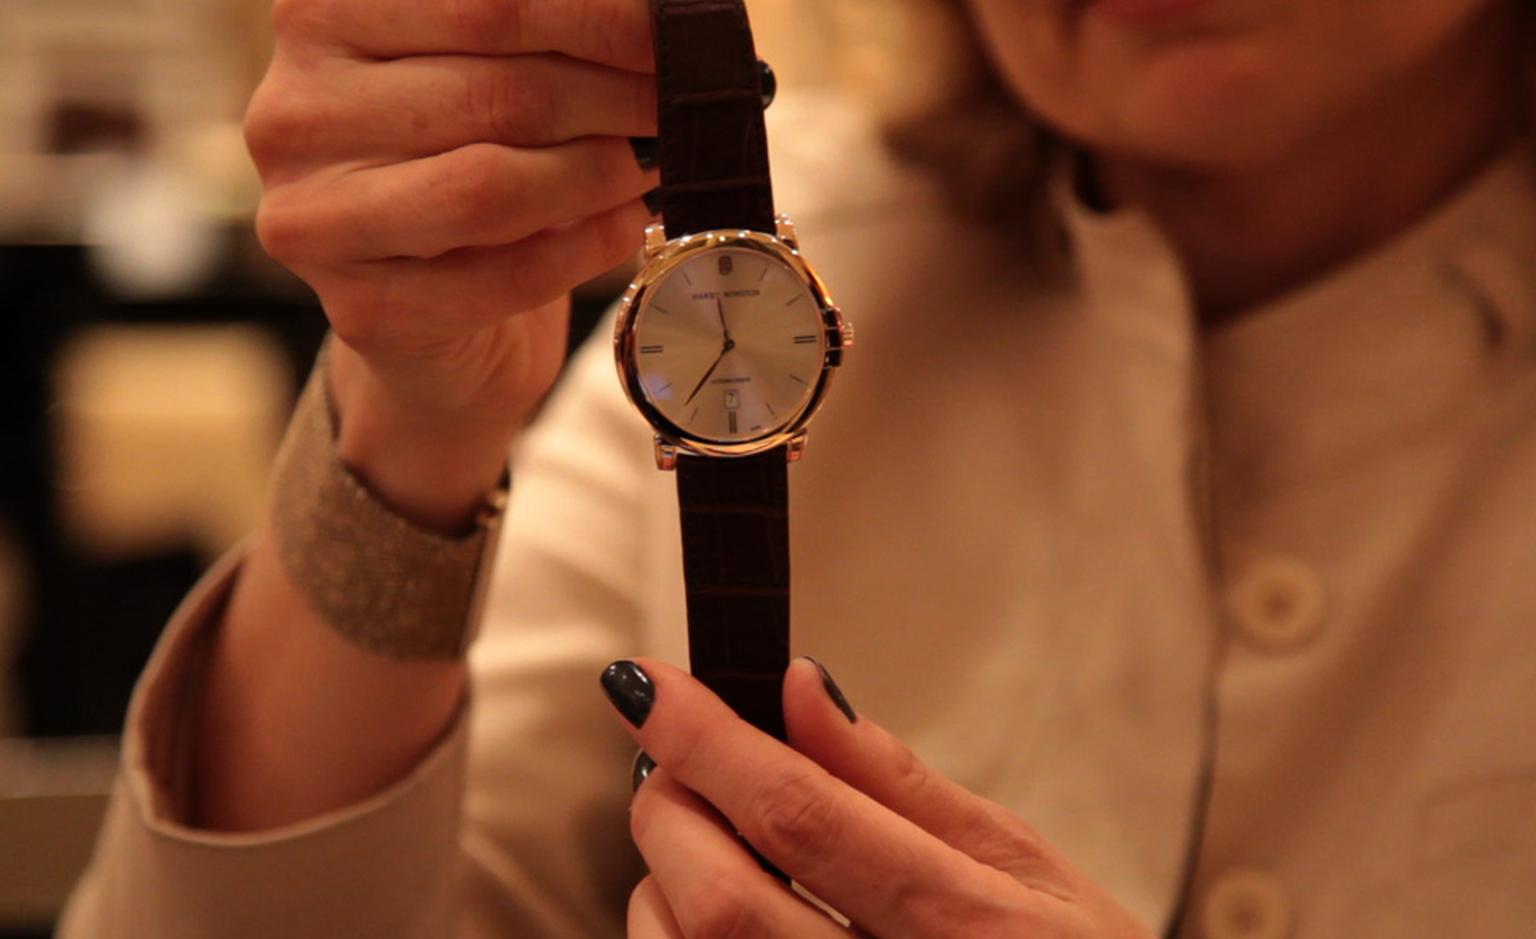 Video of Maria Doulton, The Jewellery Editor, at Harry Winston, BaselWorld 2011